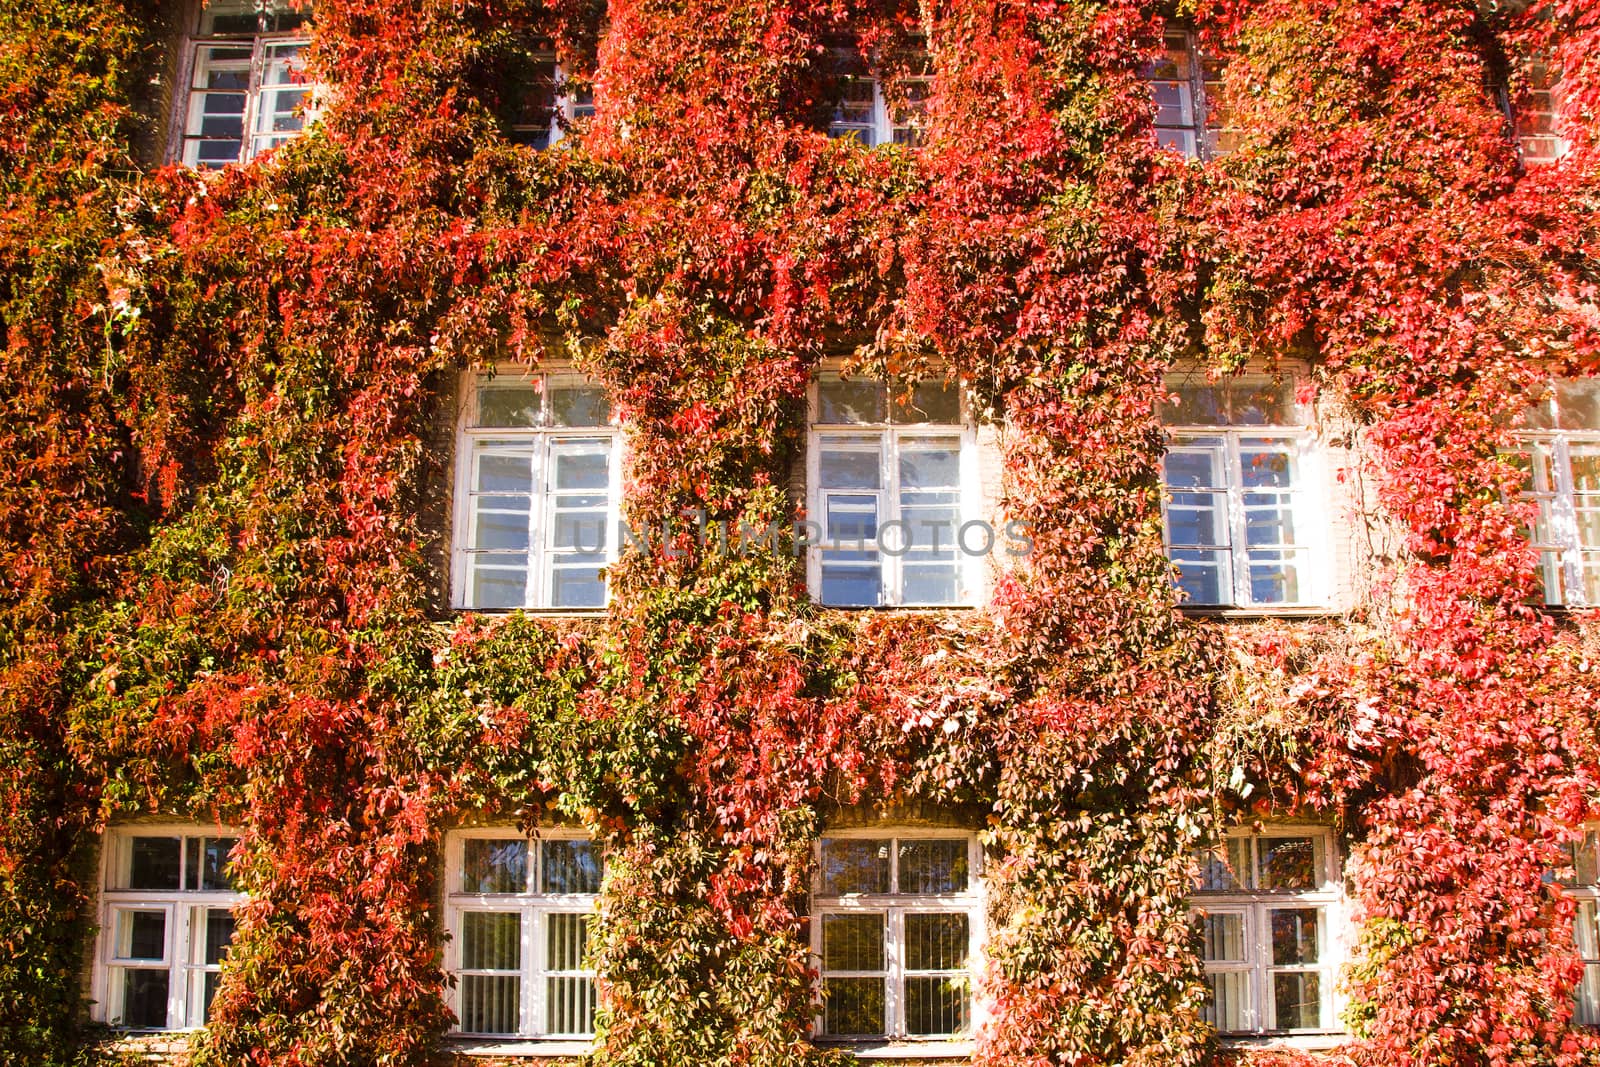 Grodno University building, covered with red Ivy